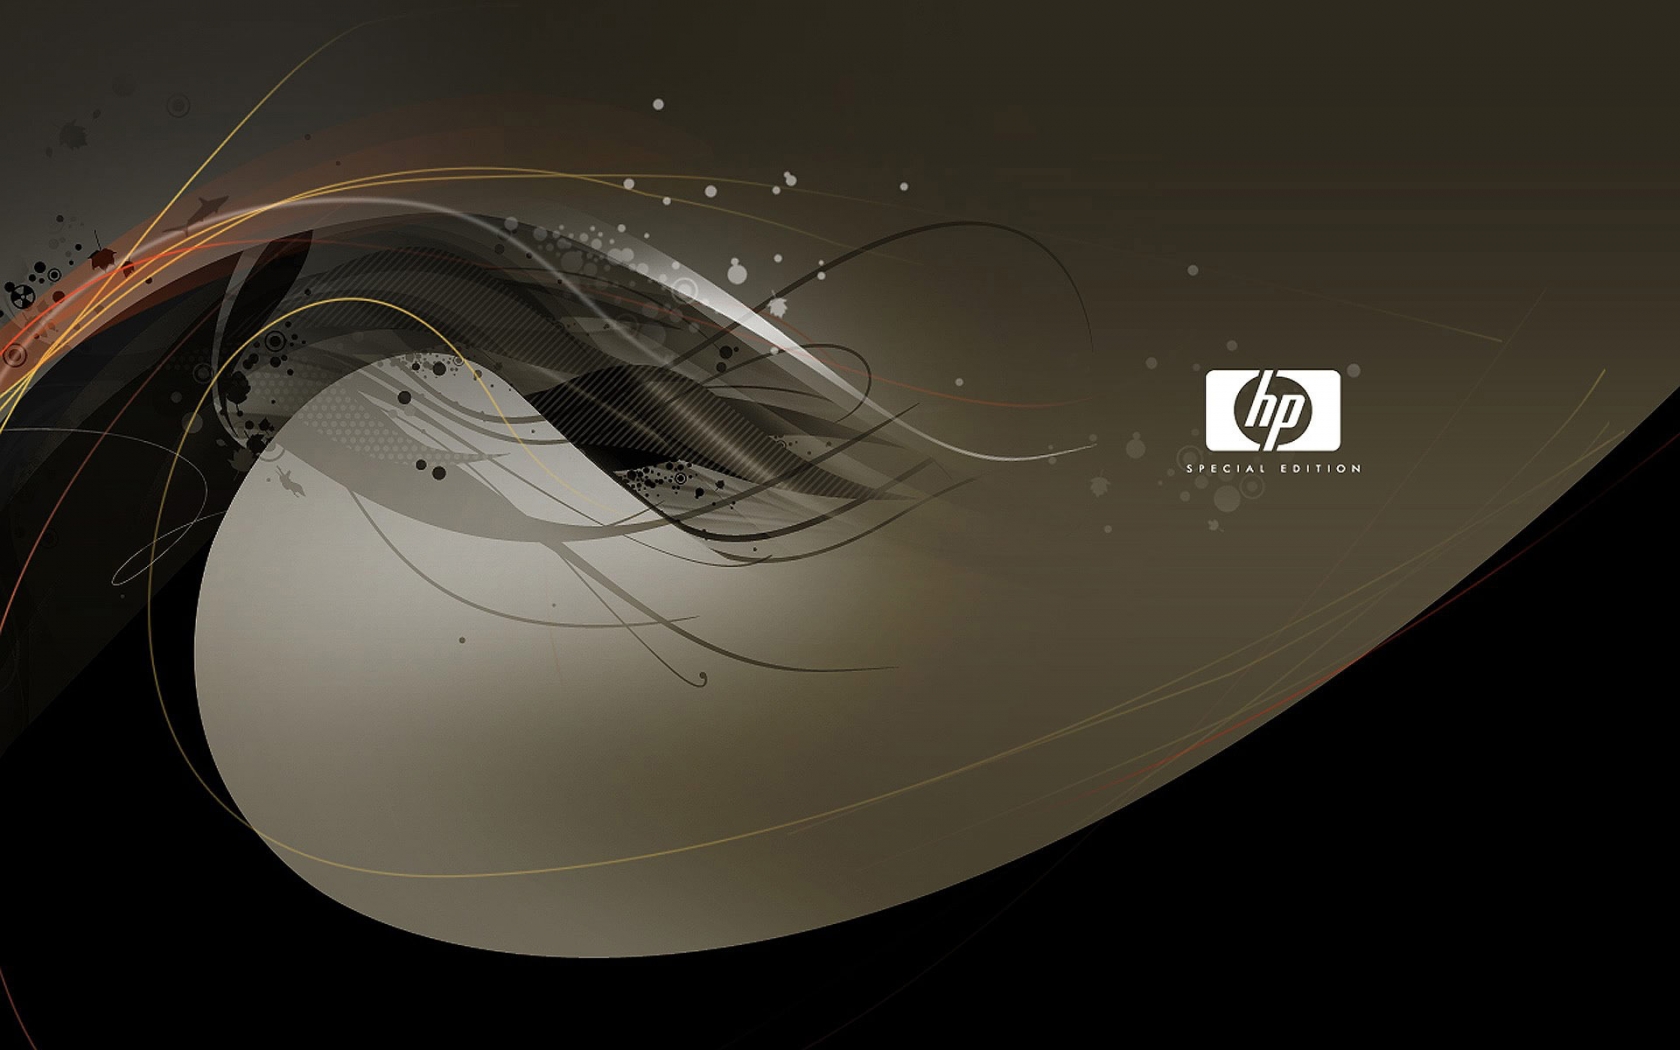 HP Special Edition for 1680 x 1050 widescreen resolution